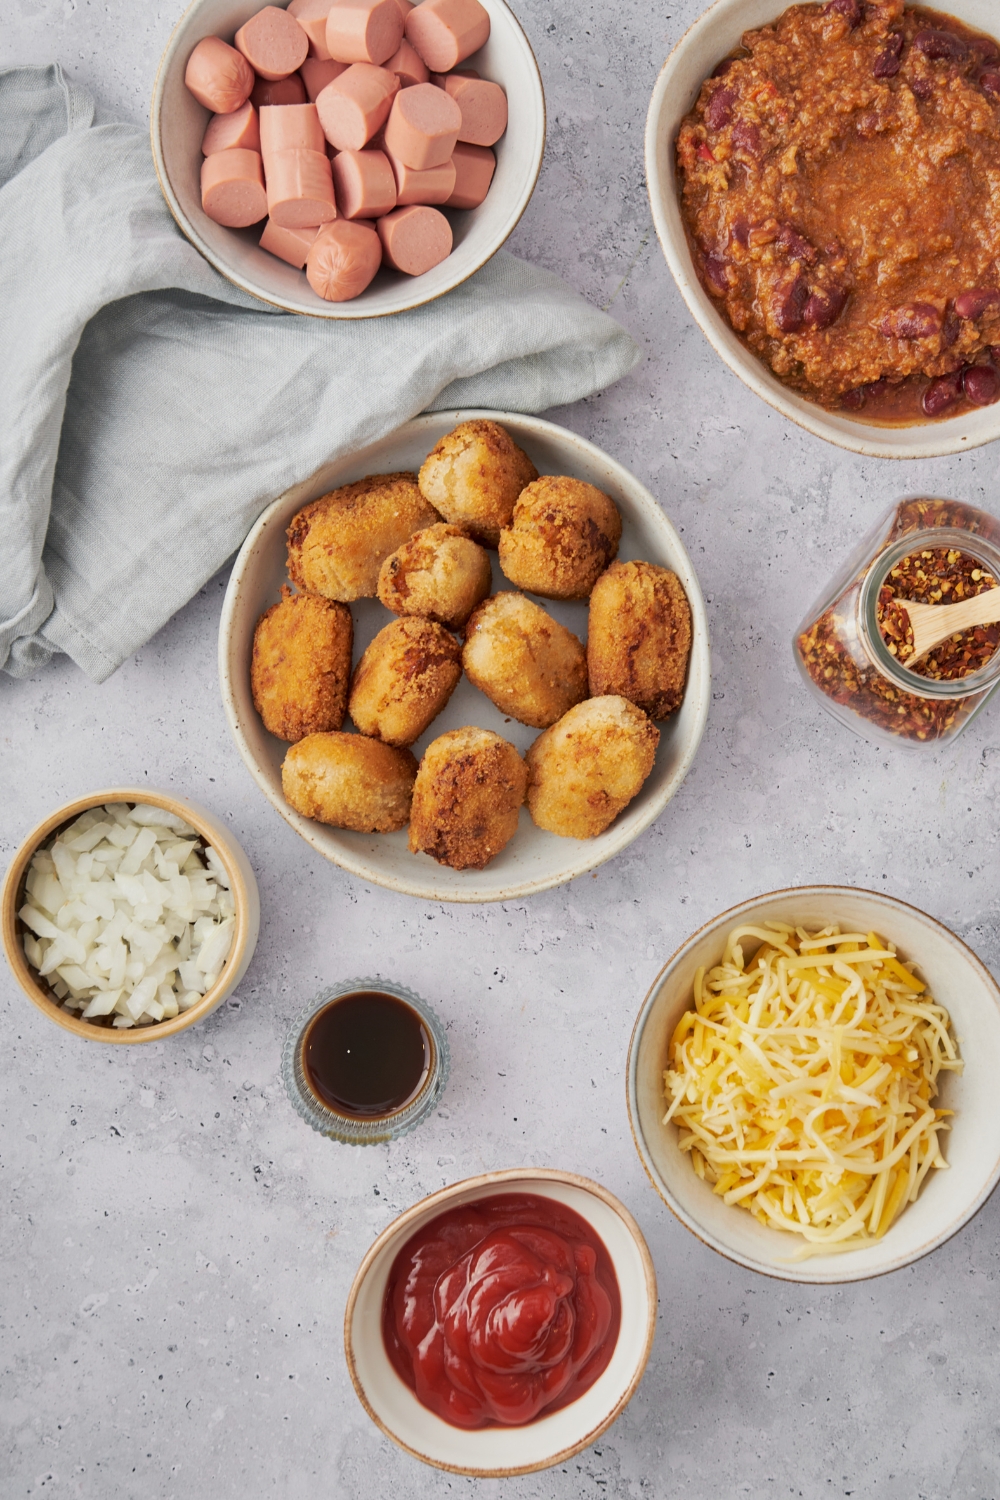 An assortment of ingredients including bowls of tater tots, chili, shredded cheese, ketchup, hot dog slices, diced onion, red pepper flakes, and Worcestershire sauce.